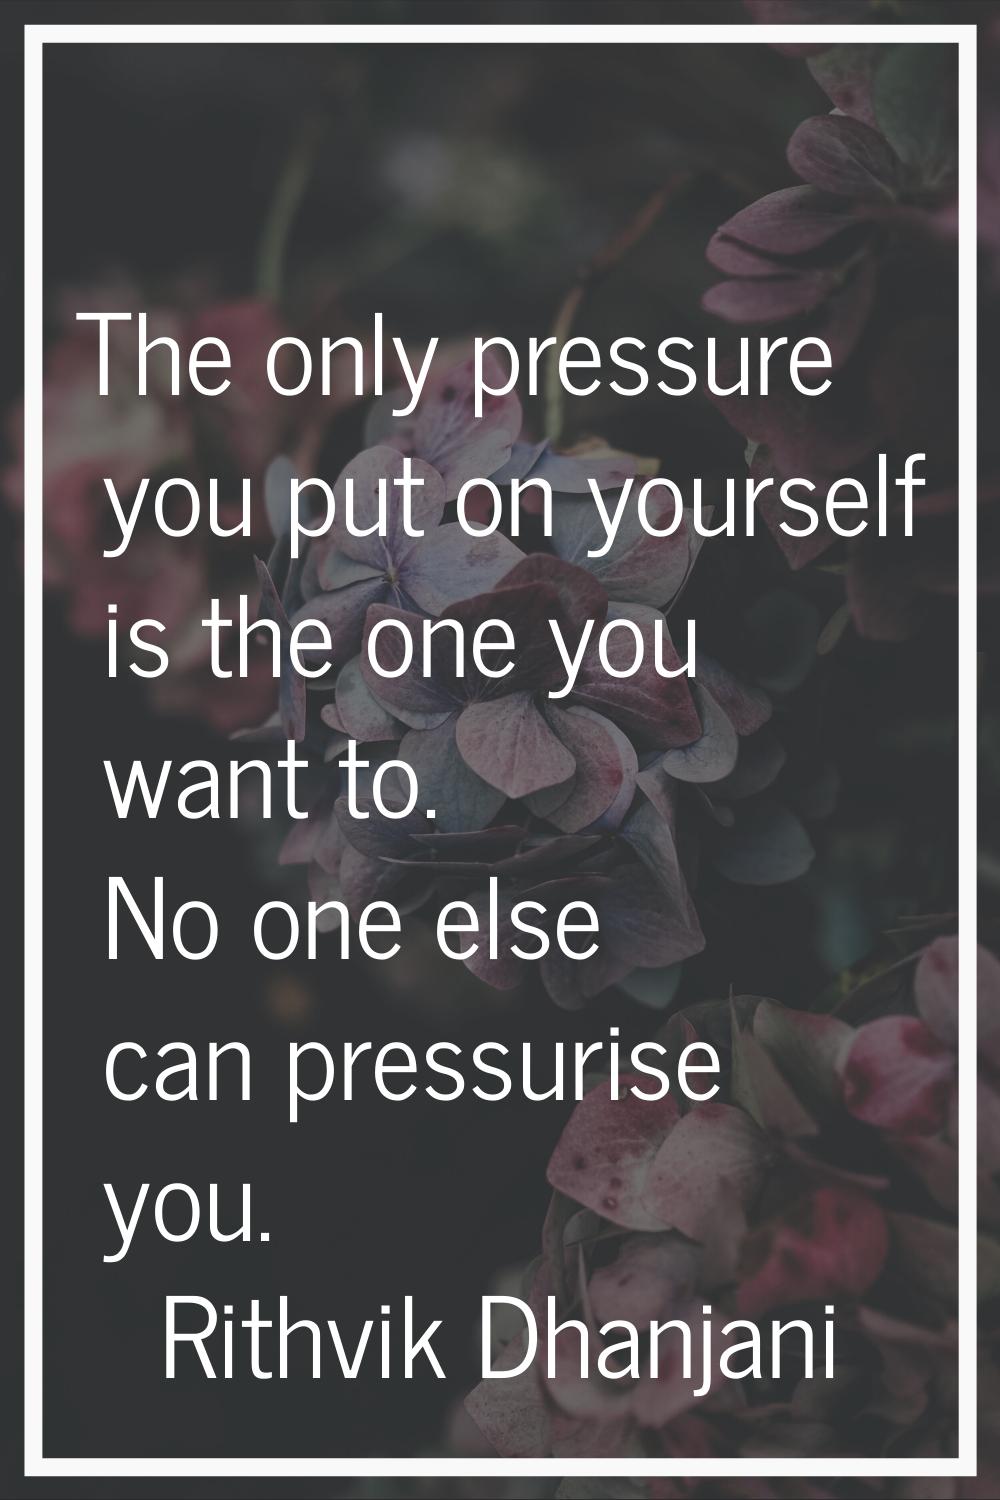 The only pressure you put on yourself is the one you want to. No one else can pressurise you.